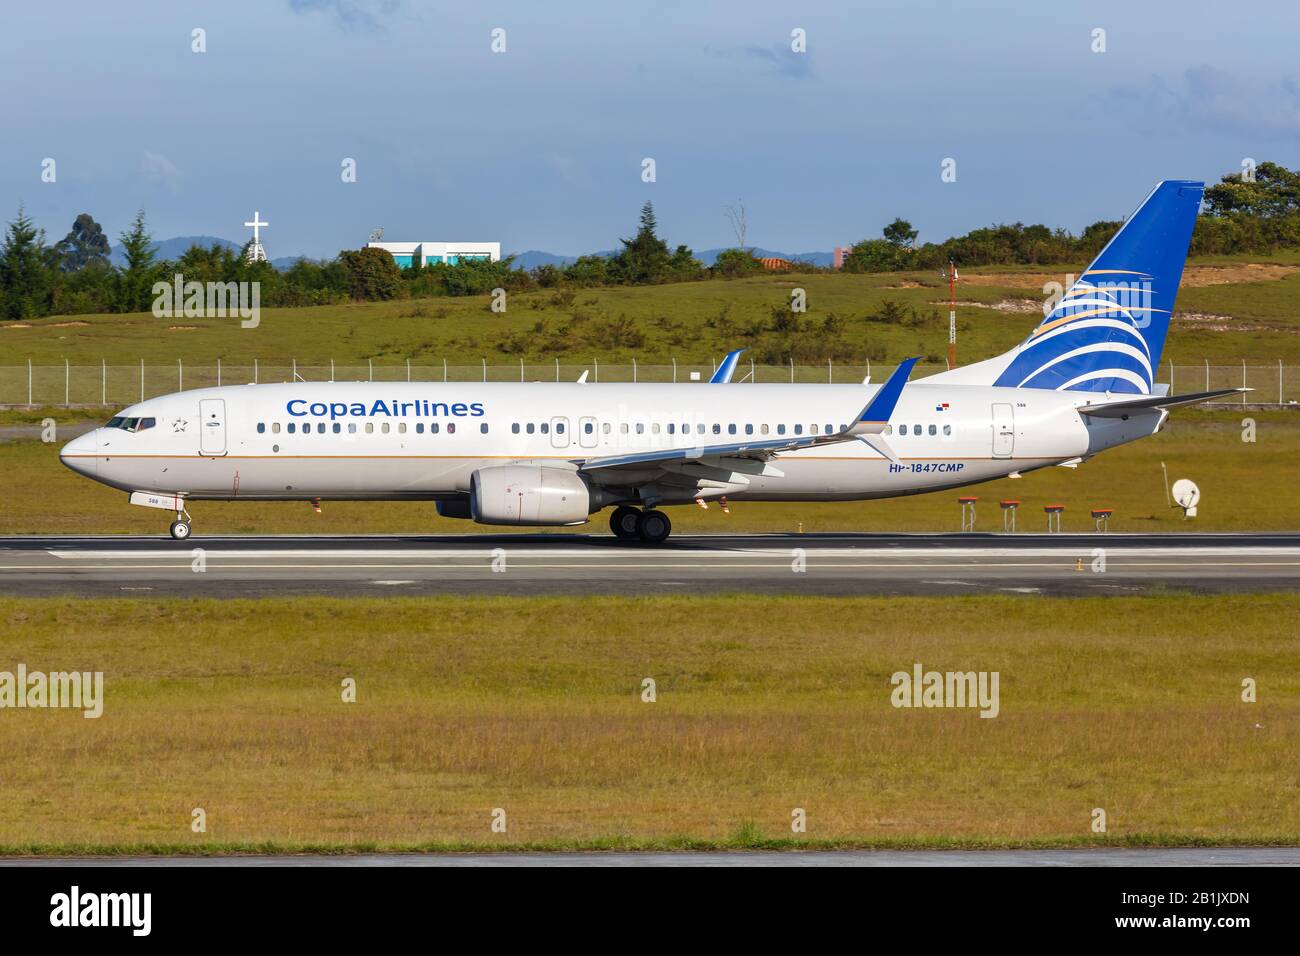 Copa Airlines Boeing 737 Airplane Bogota Airport Fepafut Special Livery  Editorial Stock Photo - Image of airways, airline: 181028388